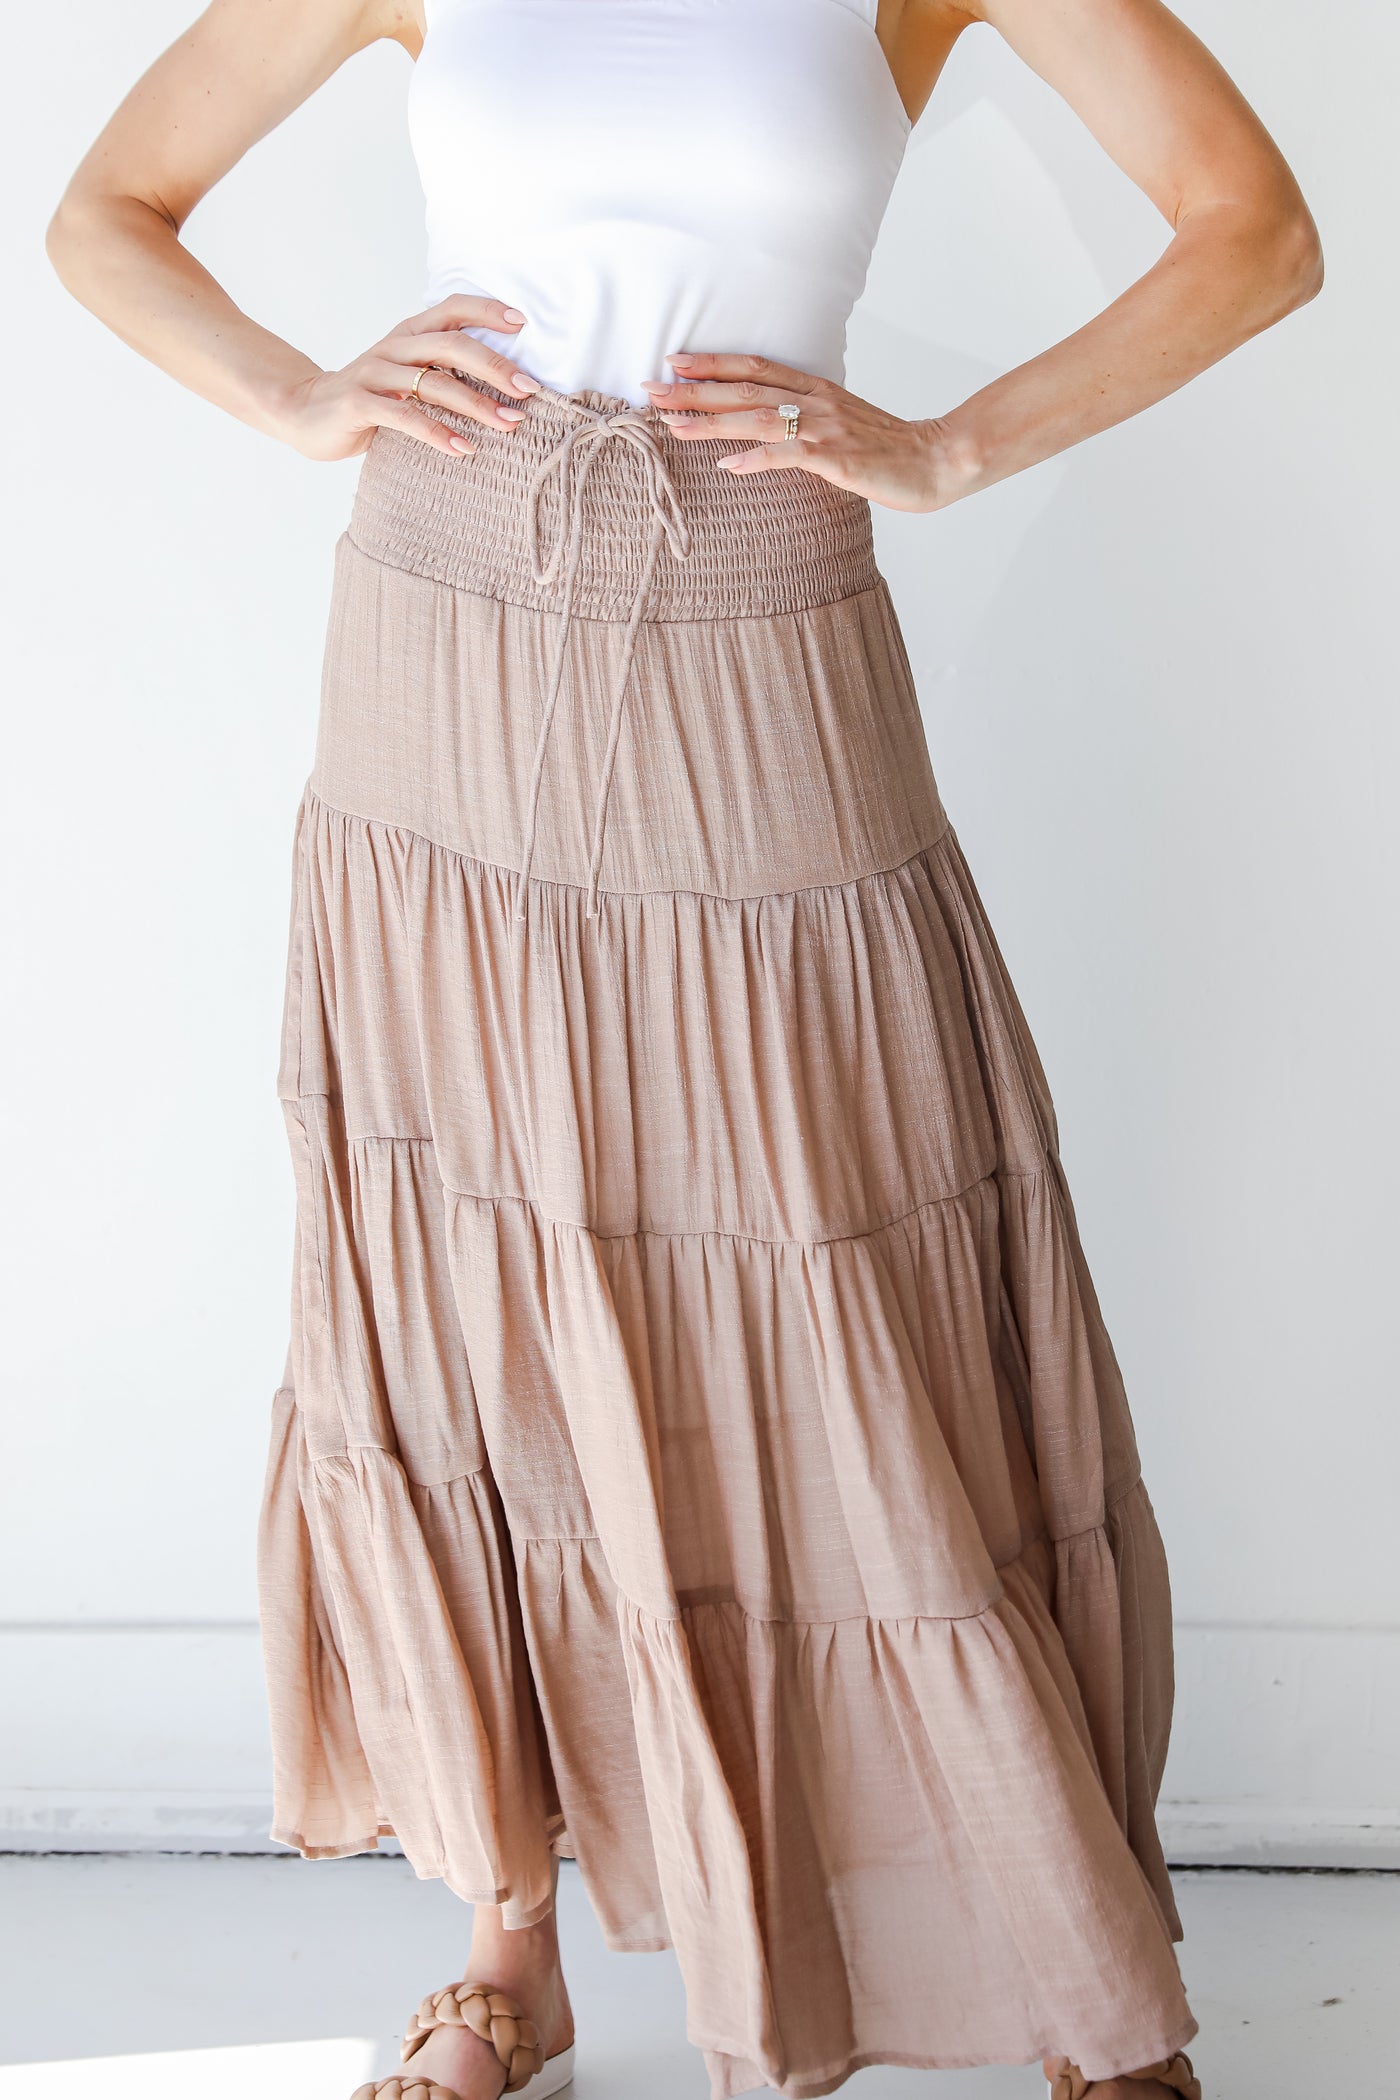 Tiered Maxi Skirt in taupe